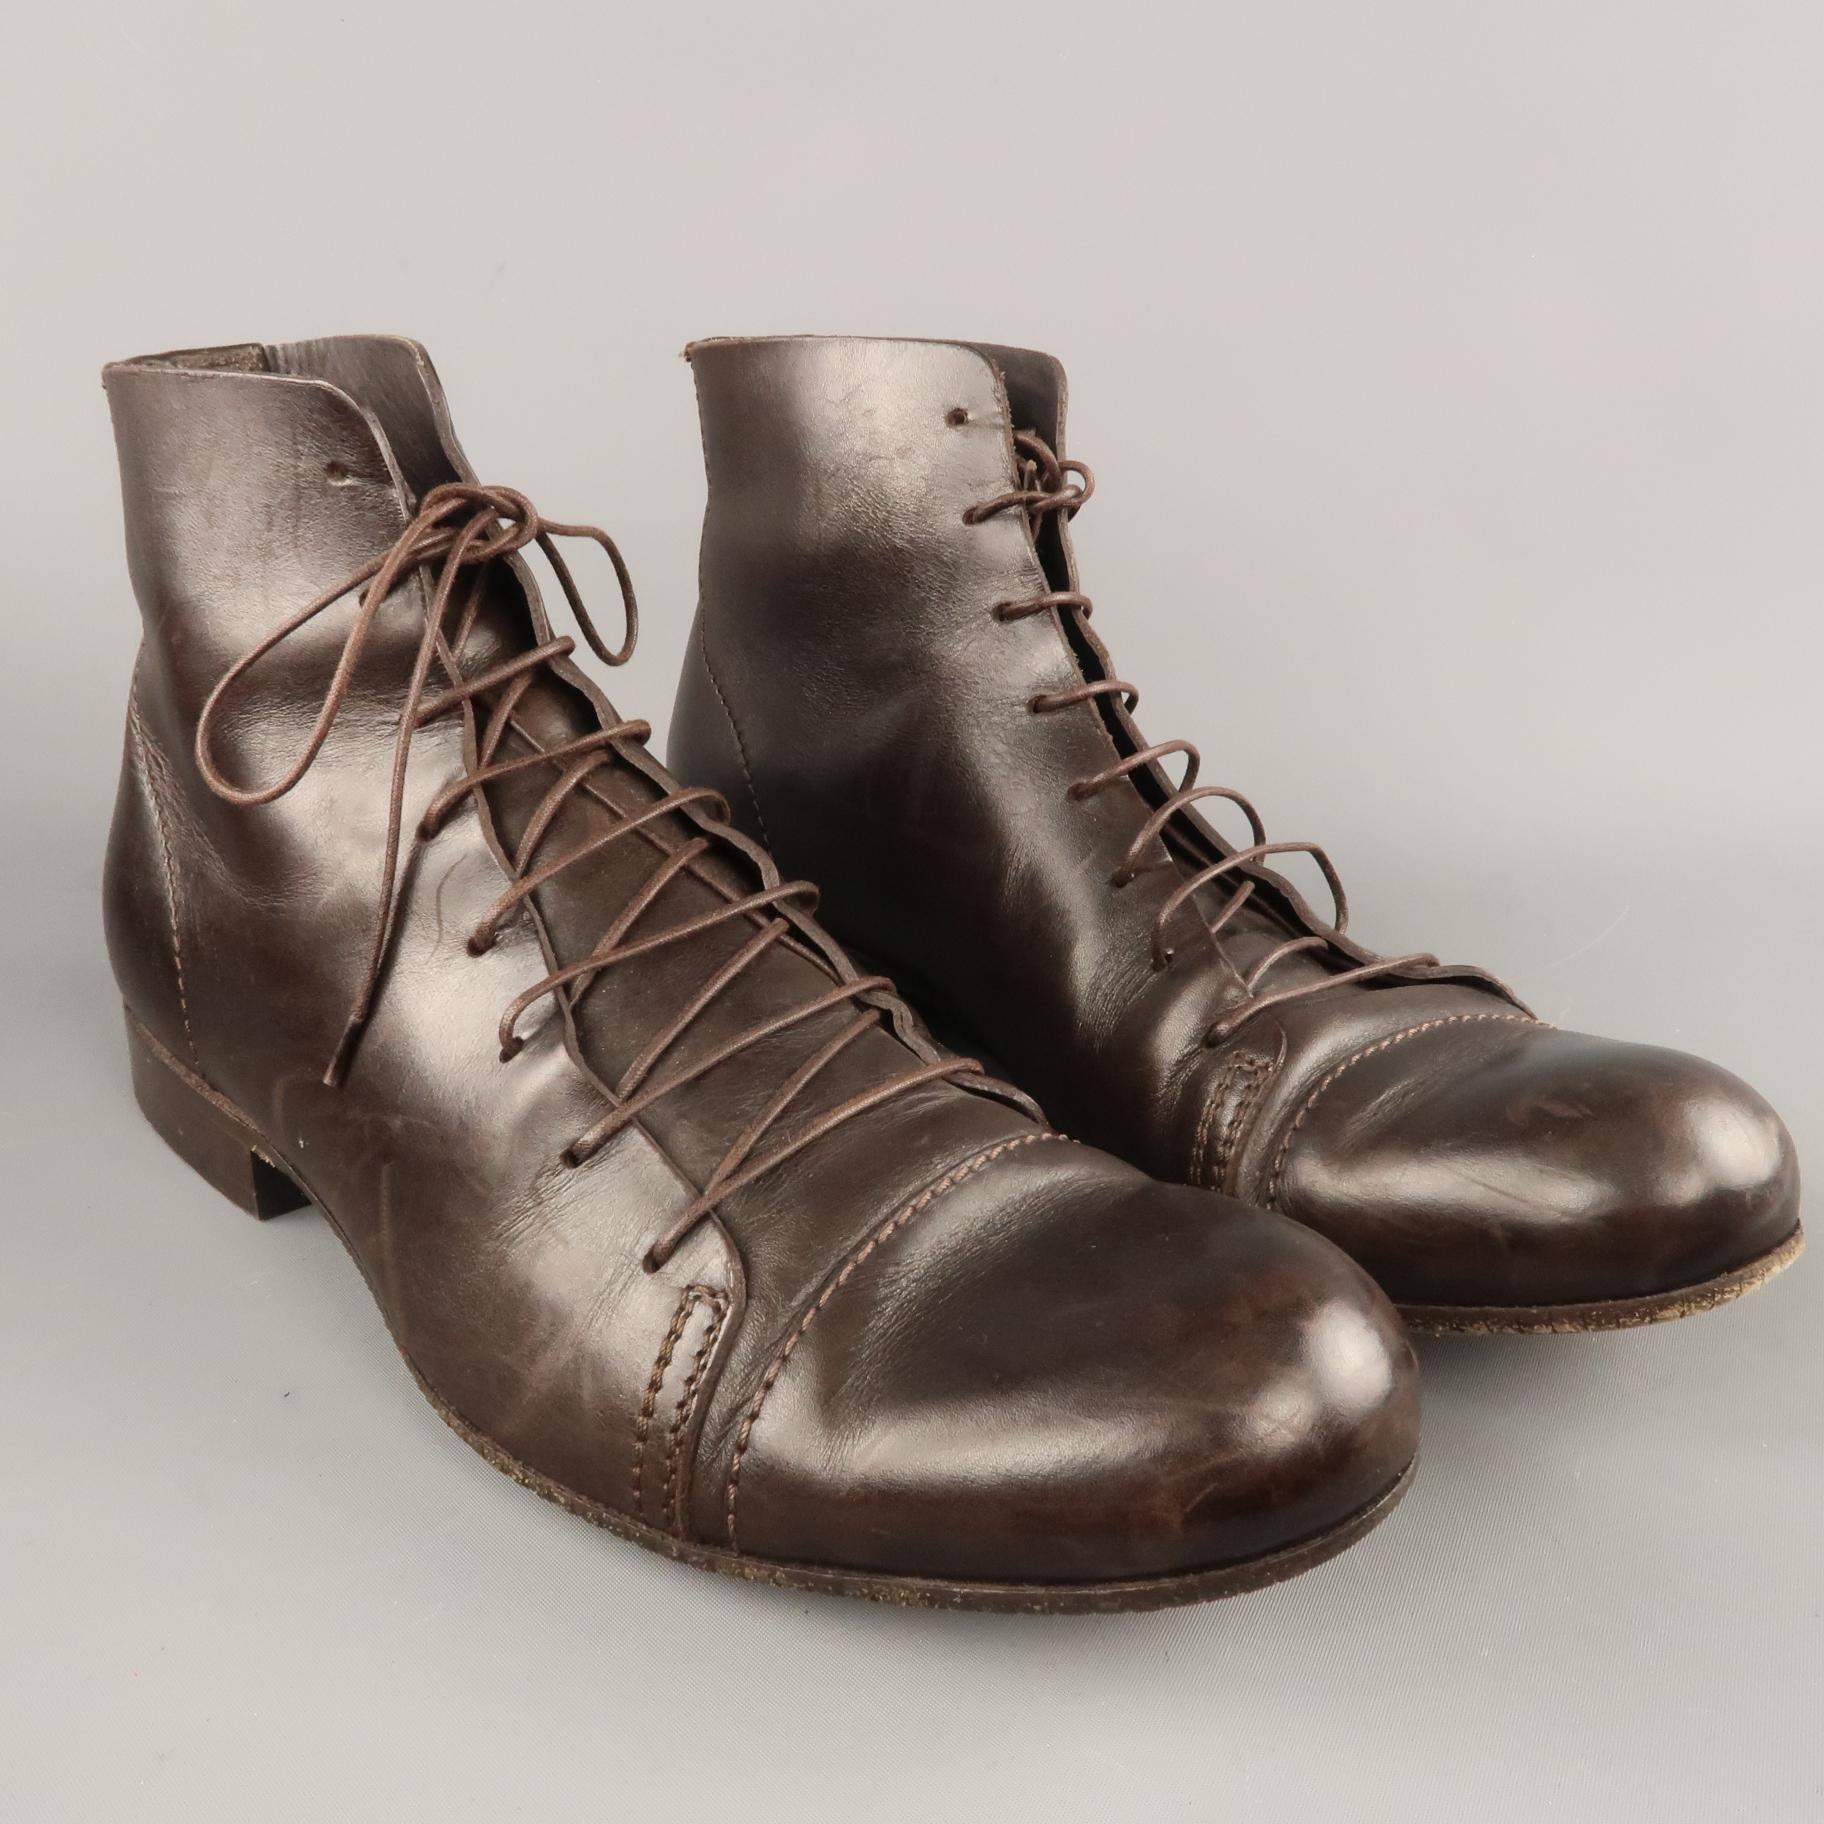 EMPORIO ARMANI ankle boots come in deep brown leather with a round capped toe and lace up front. With box. Made in Italy.
 
Very Good Pre-Owned Condition.
Marked:IT 42
 
Outsole: 11.5 x 4 in.